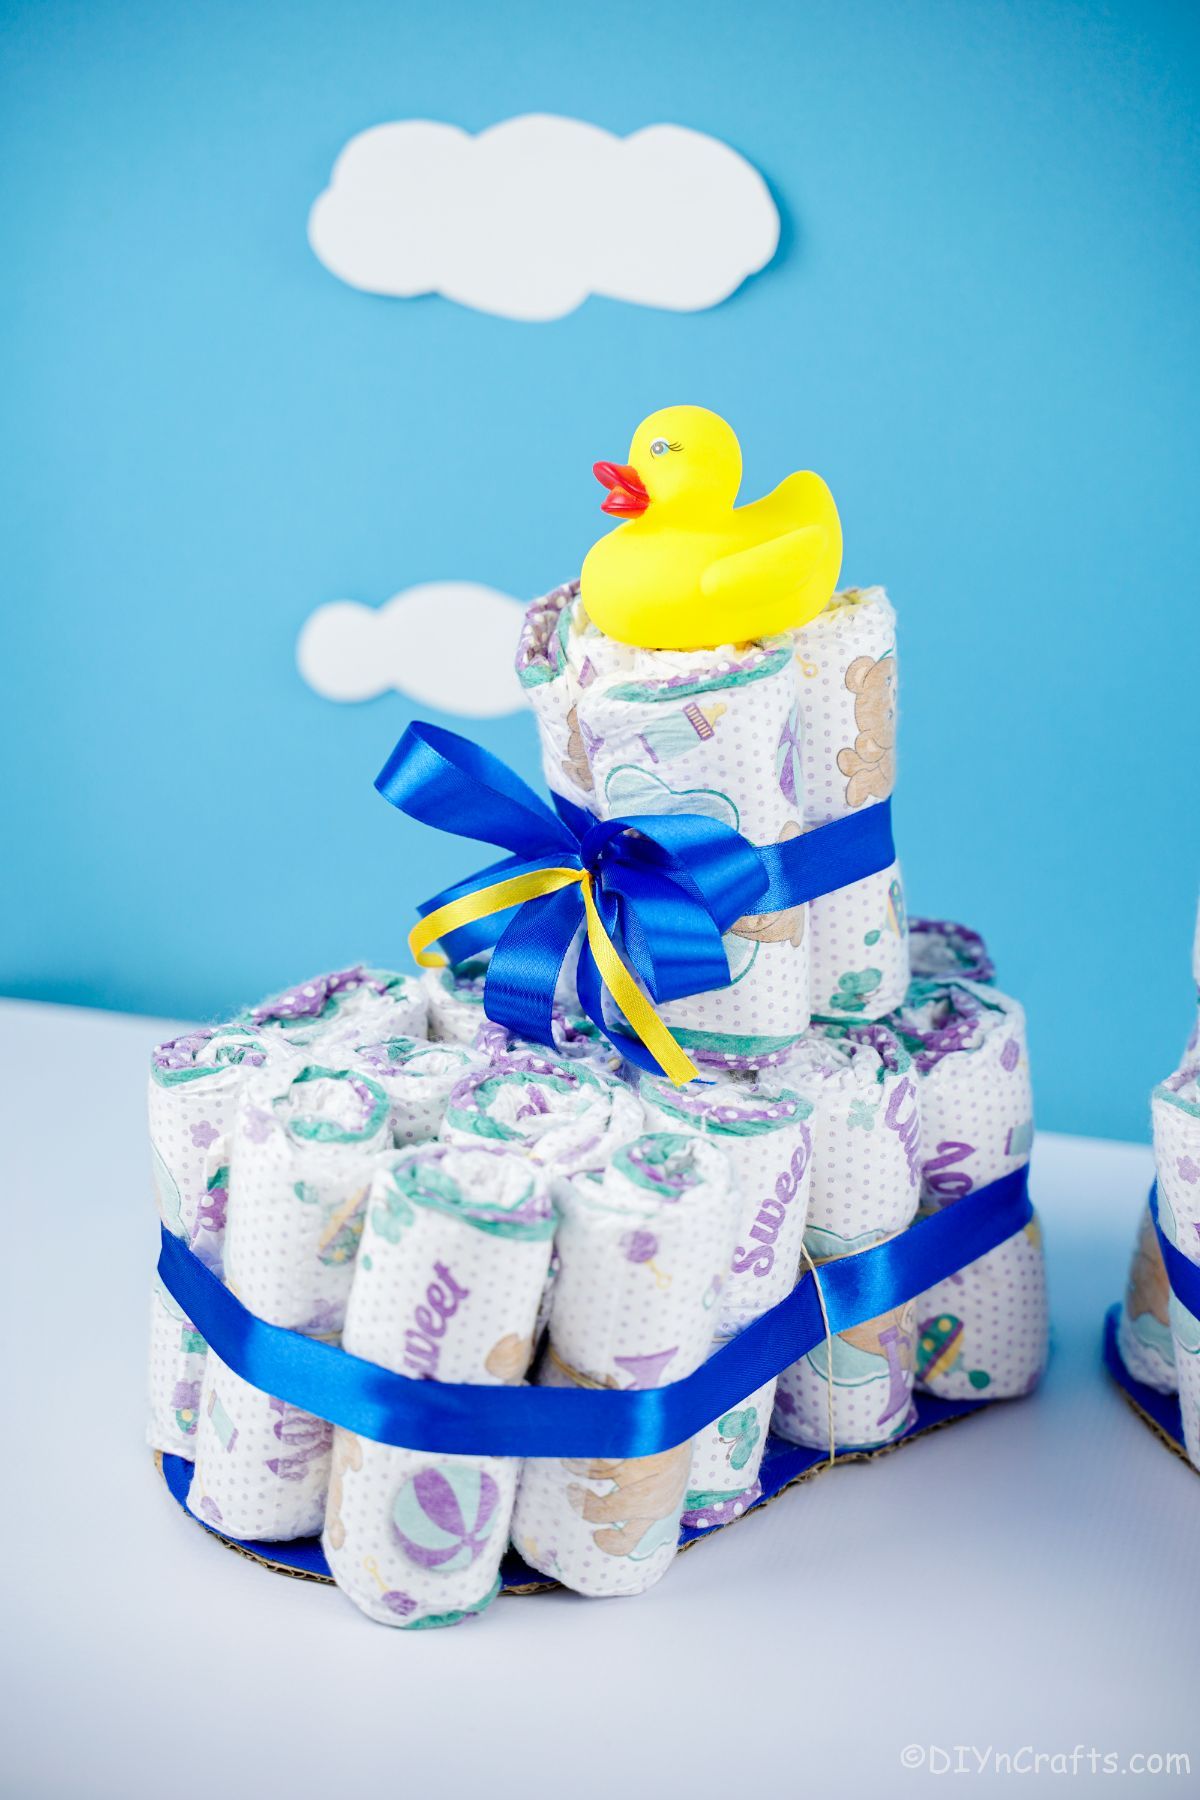 blue wall behind blue accent diaper cake shoe with rubber duck on top